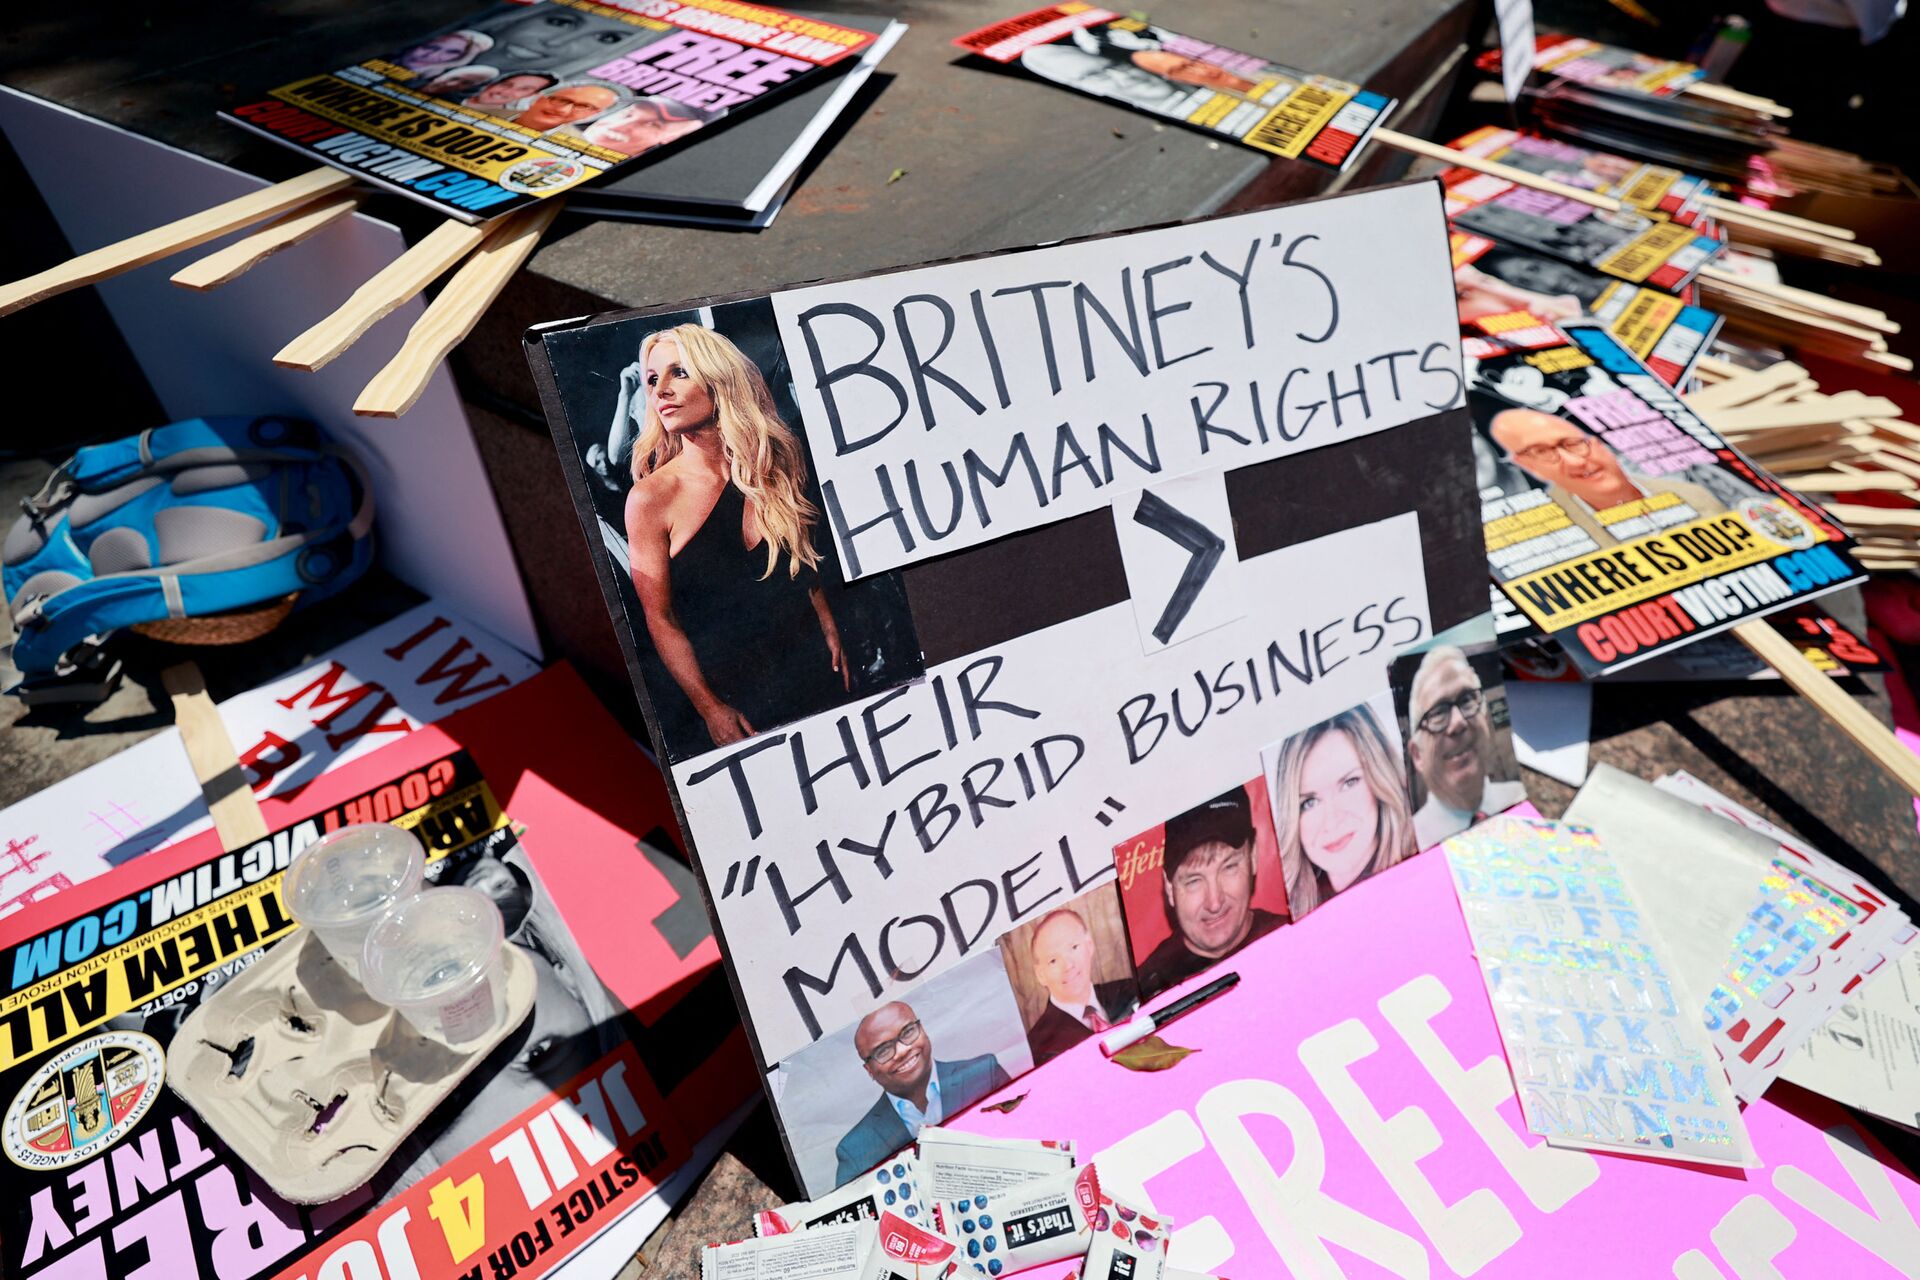 Protester signs are seen at a #FreeBritney Rally at Stanley Mosk Courthouse on July 14, 2021 in Los Angeles, California. The group is calling for an end to the 13-year conservatorship lead by the pop star's father, Jamie Spears and Jodi Montgomery, who have control over her finances and business dealings. Planned co-conservator Bessemer Trust is petitioning the court to resign from its position after Britney Spears spoke out in court about the conservatorship. - Sputnik International, 1920, 07.09.2021